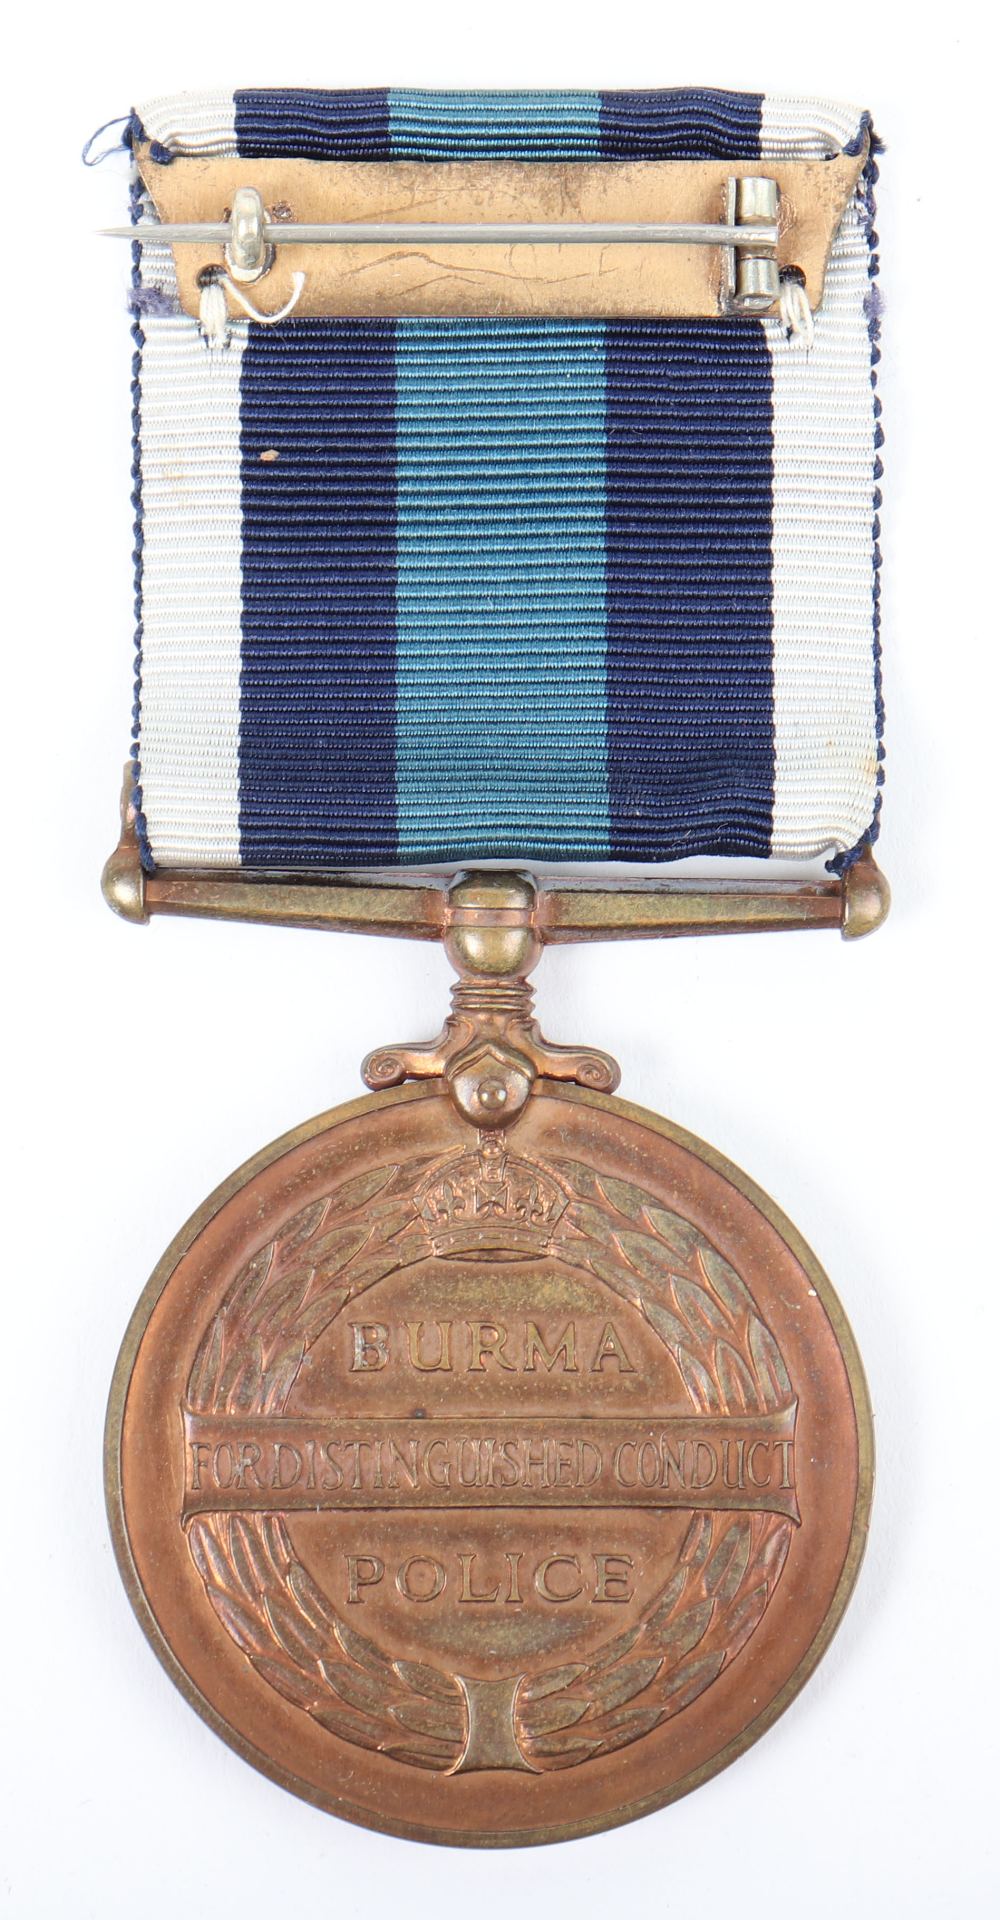 Rare George VI Burma Police Medal Awarded to William James Barron District Superintendent of Police, - Image 3 of 5